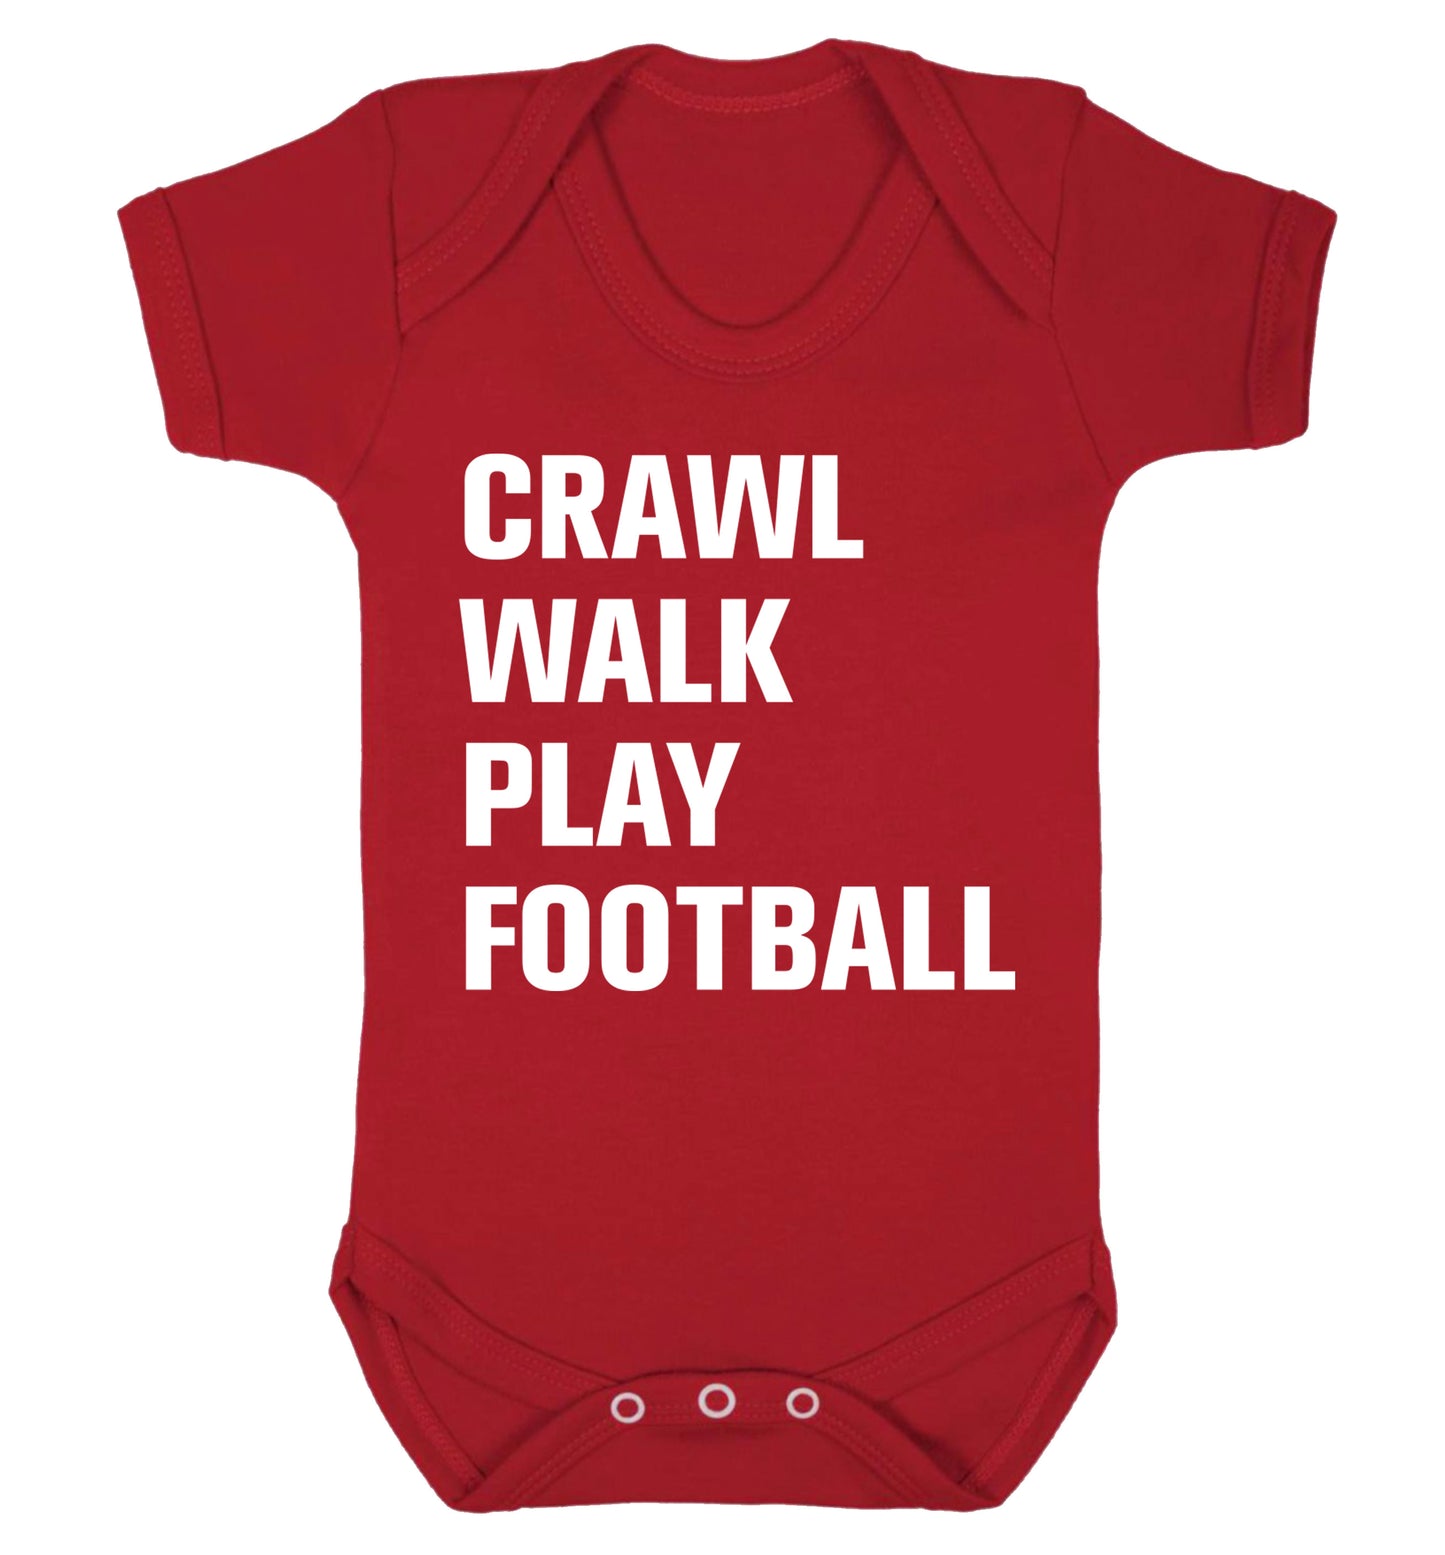 Crawl, walk, play football Baby Vest red 18-24 months